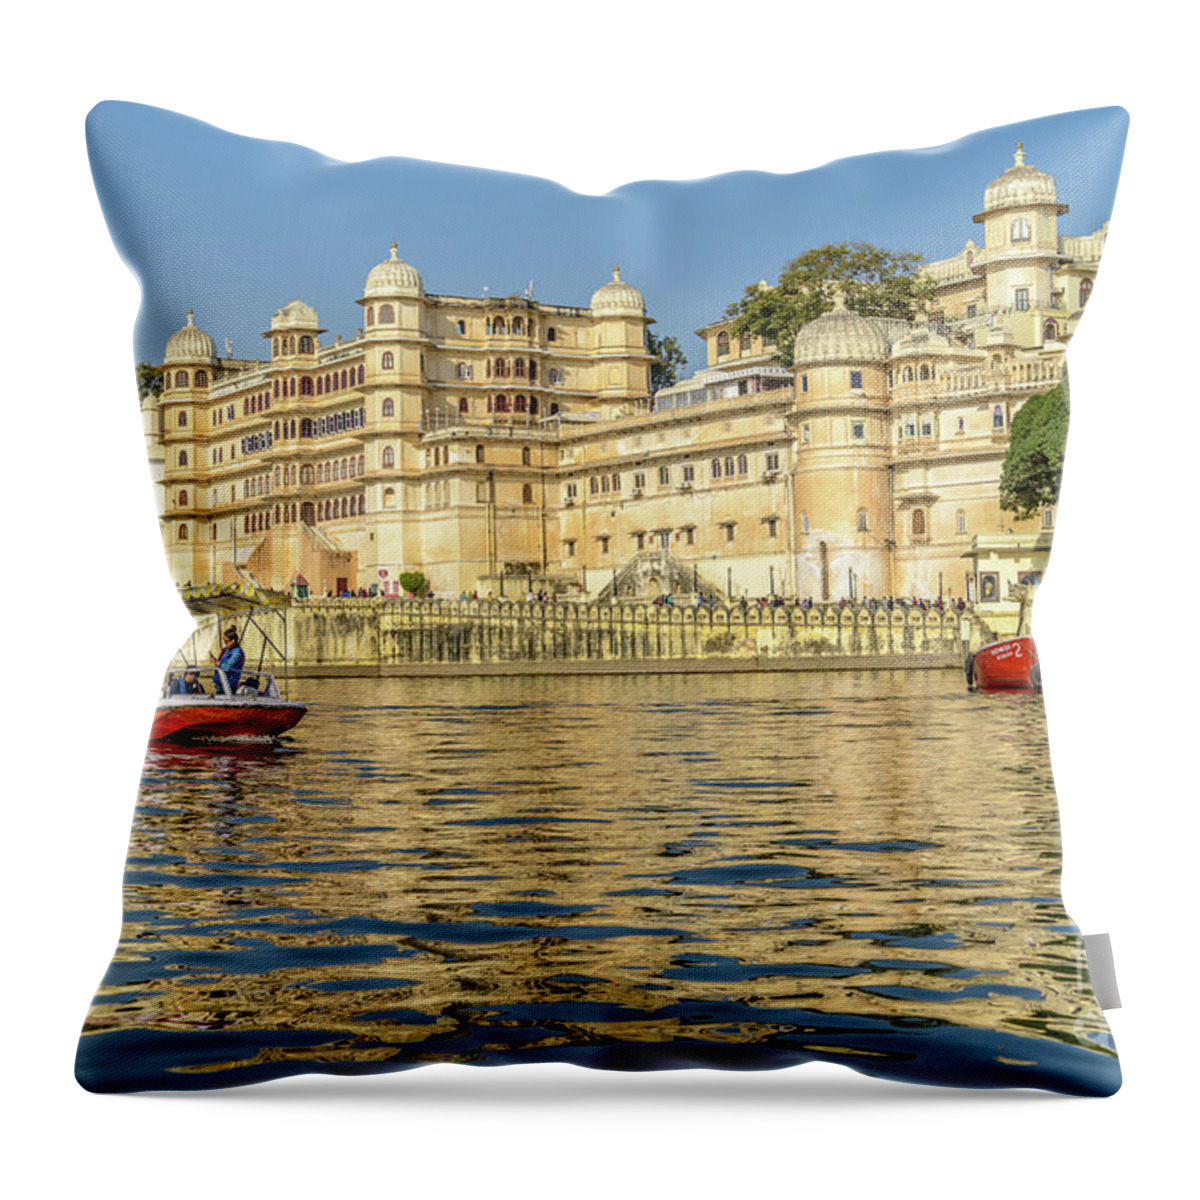 India Throw Pillow featuring the photograph Udaipur City Palace 01 by Werner Padarin